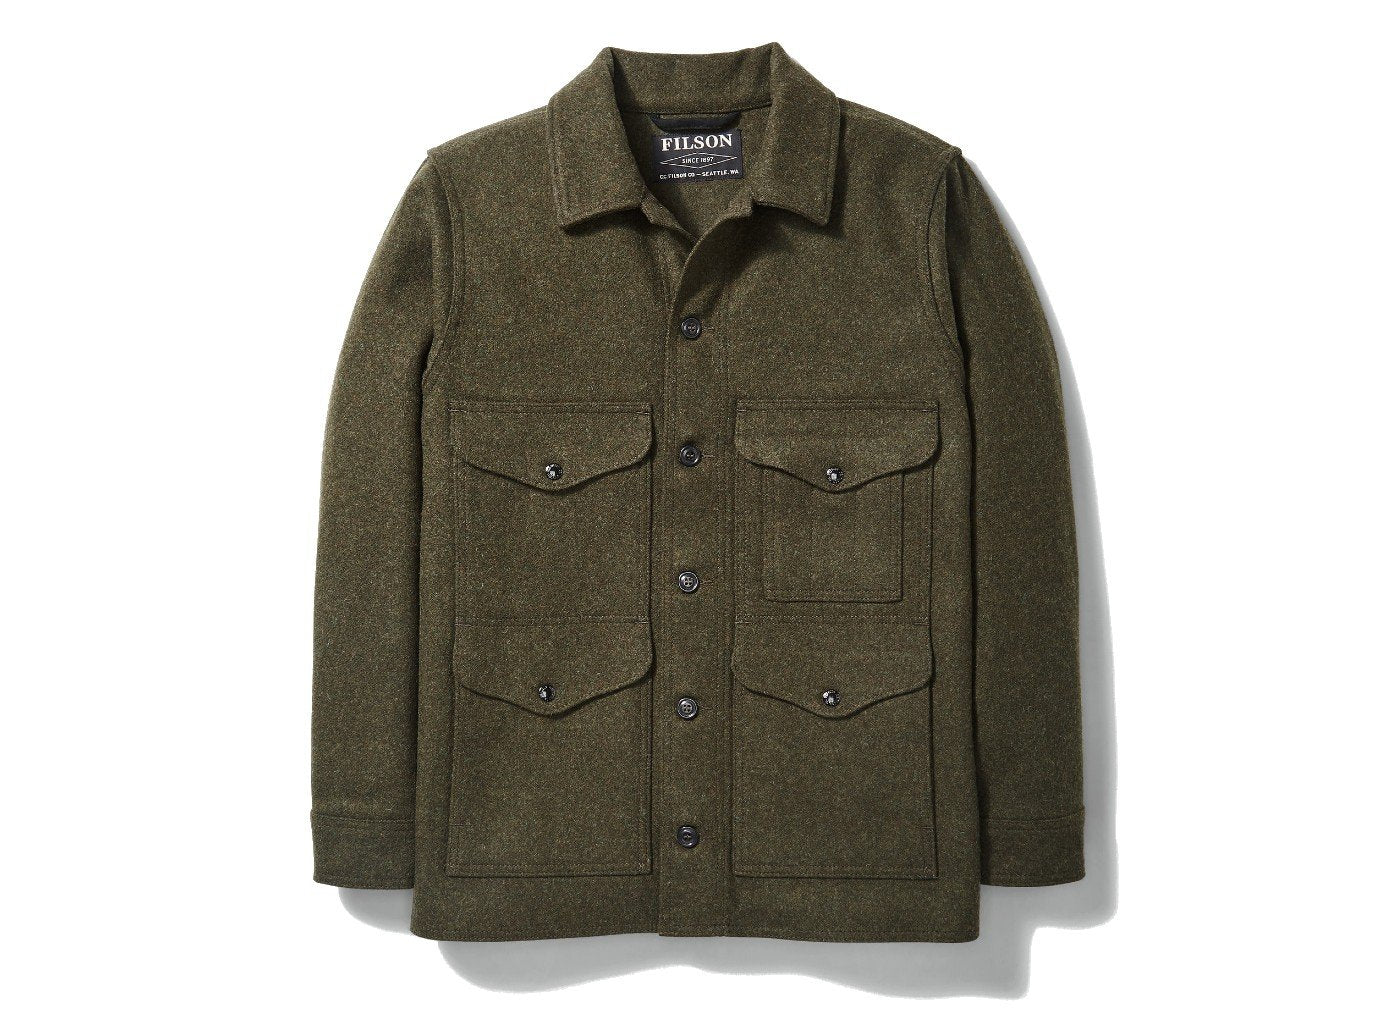 Front view of Filson Mackinaw Cruiser jacket in forest green